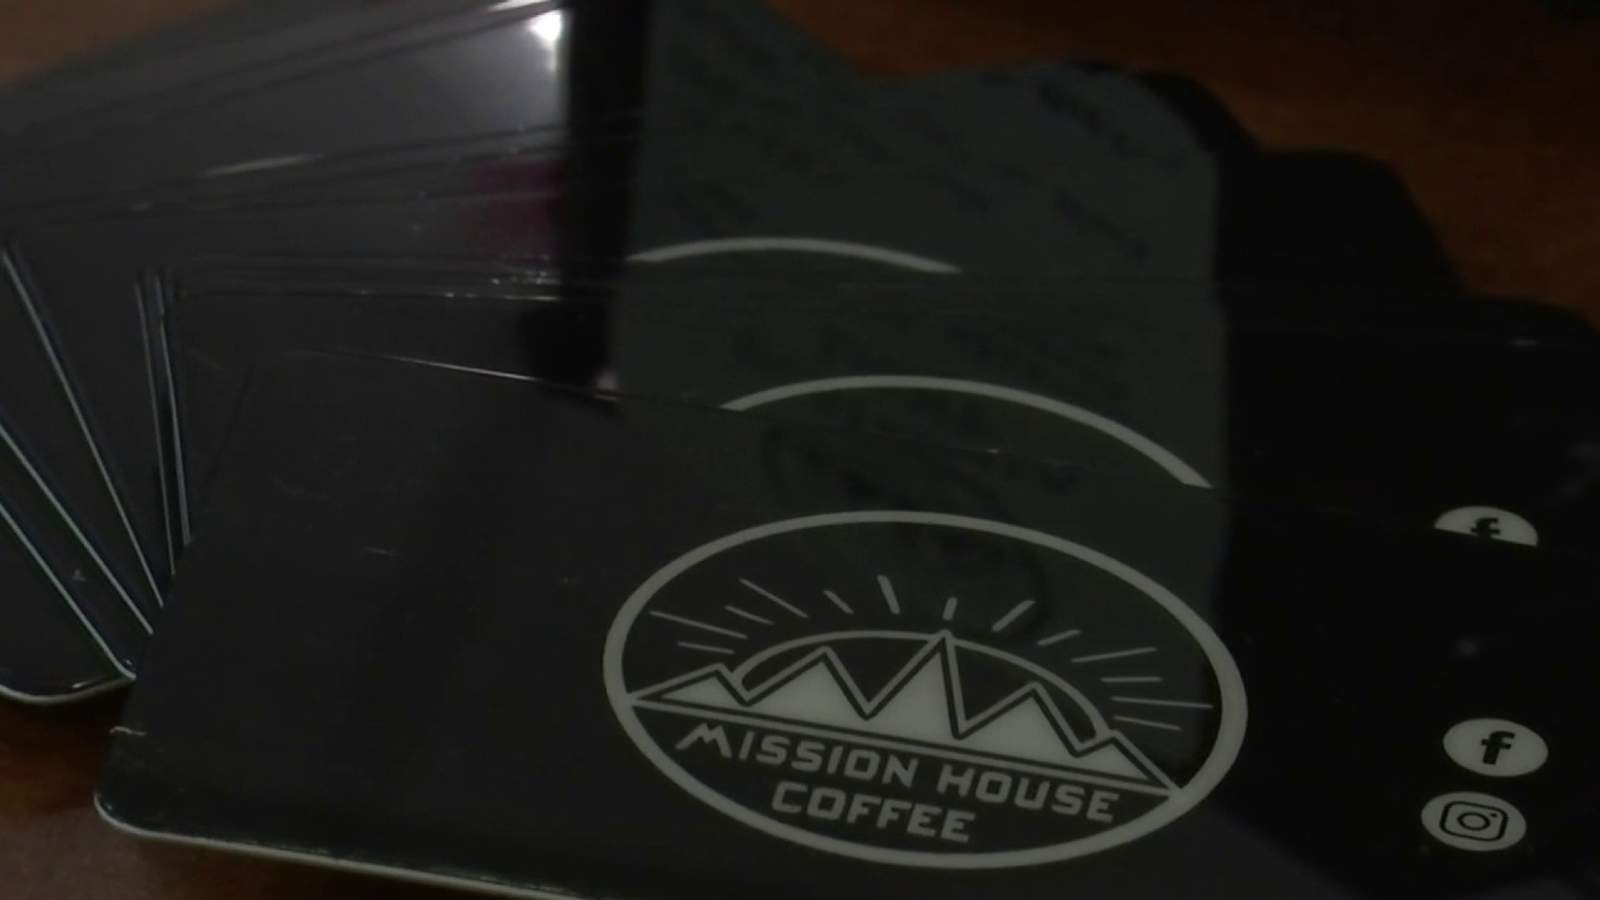 Have a Starbucks gift card? This Lynchburg coffee shop will trade you for one of its own